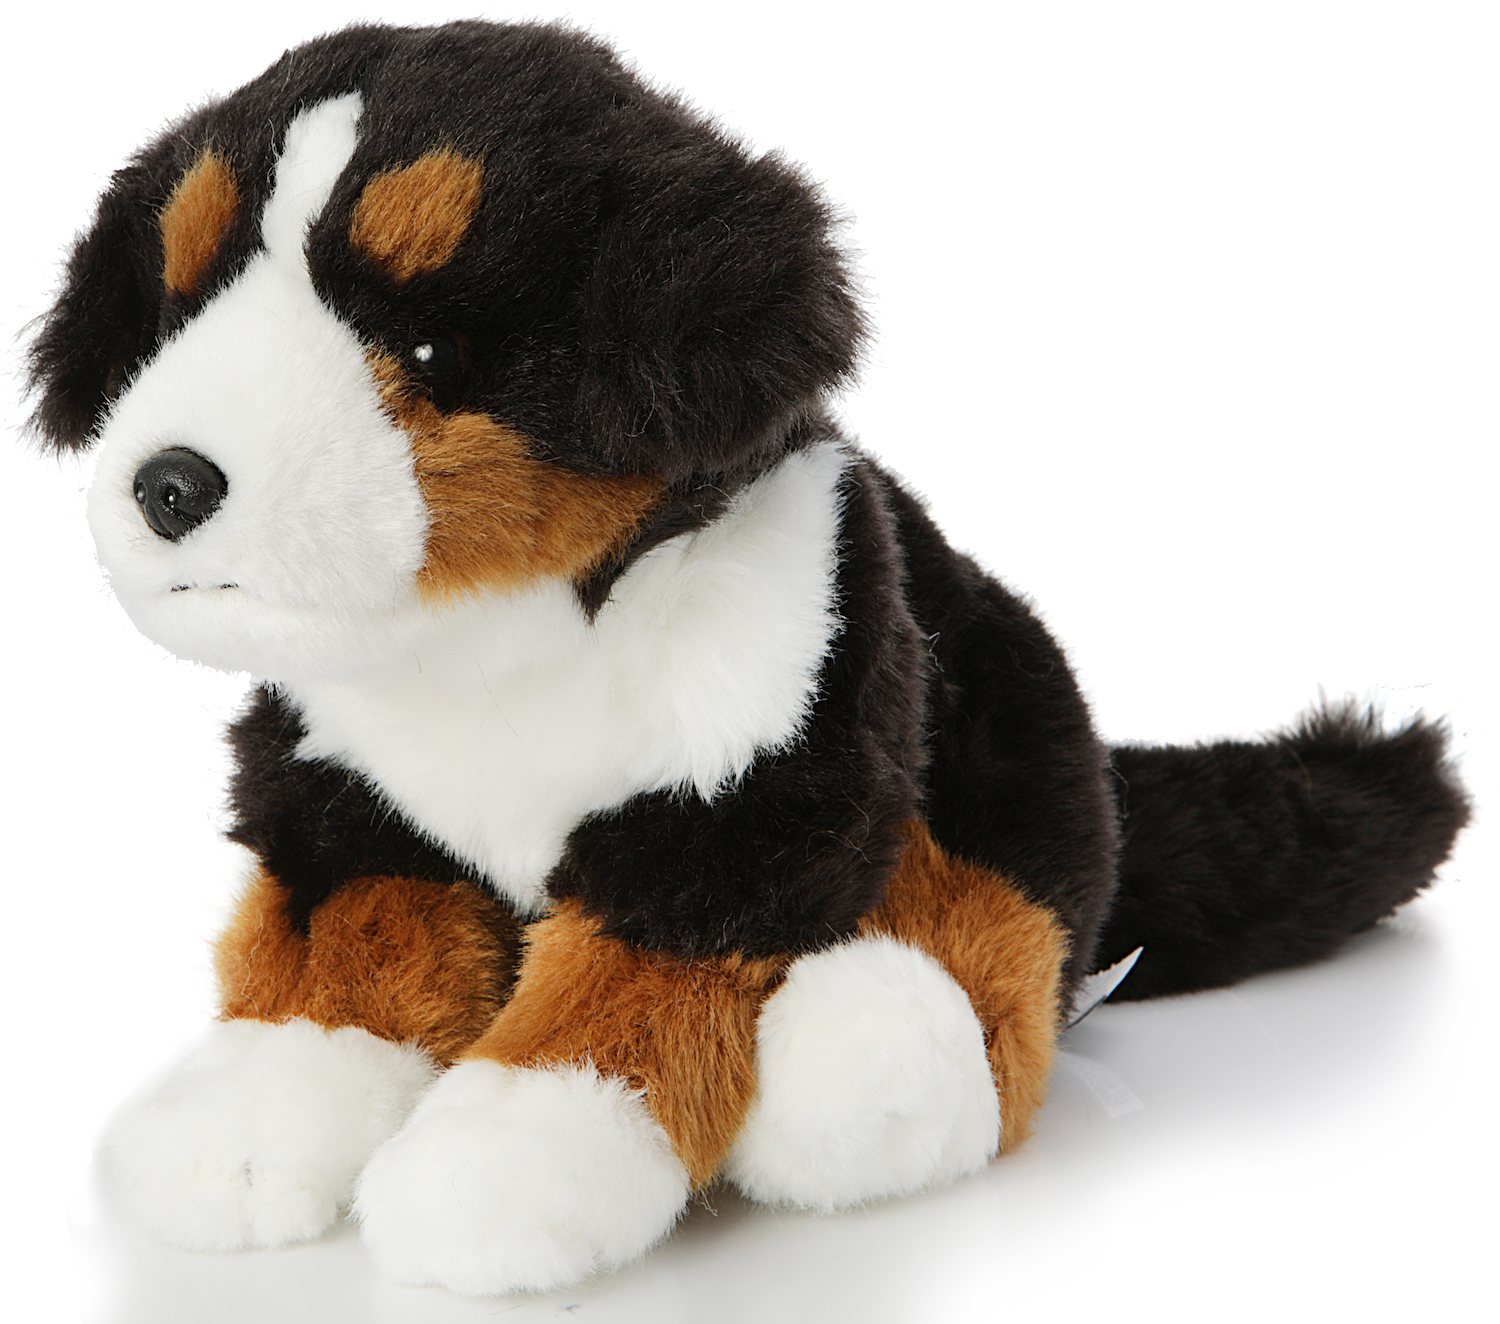 Bernese Mountain Dog puppy, sitting - Without leash - 19 cm (height)